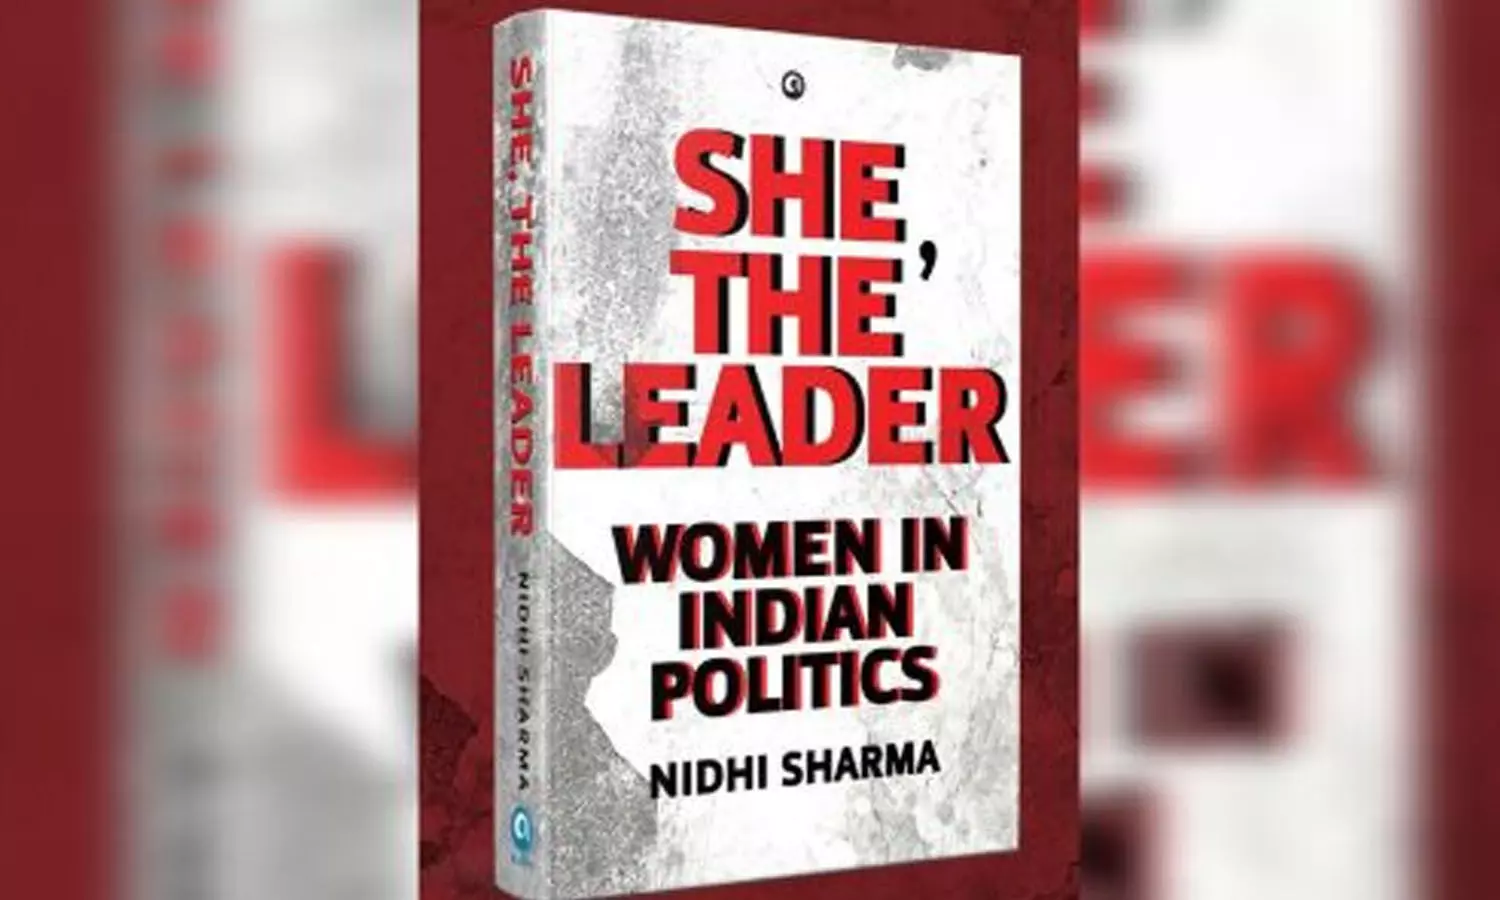 MLC Kavitha to join “She the Leader” book launch in Delhi on August 11